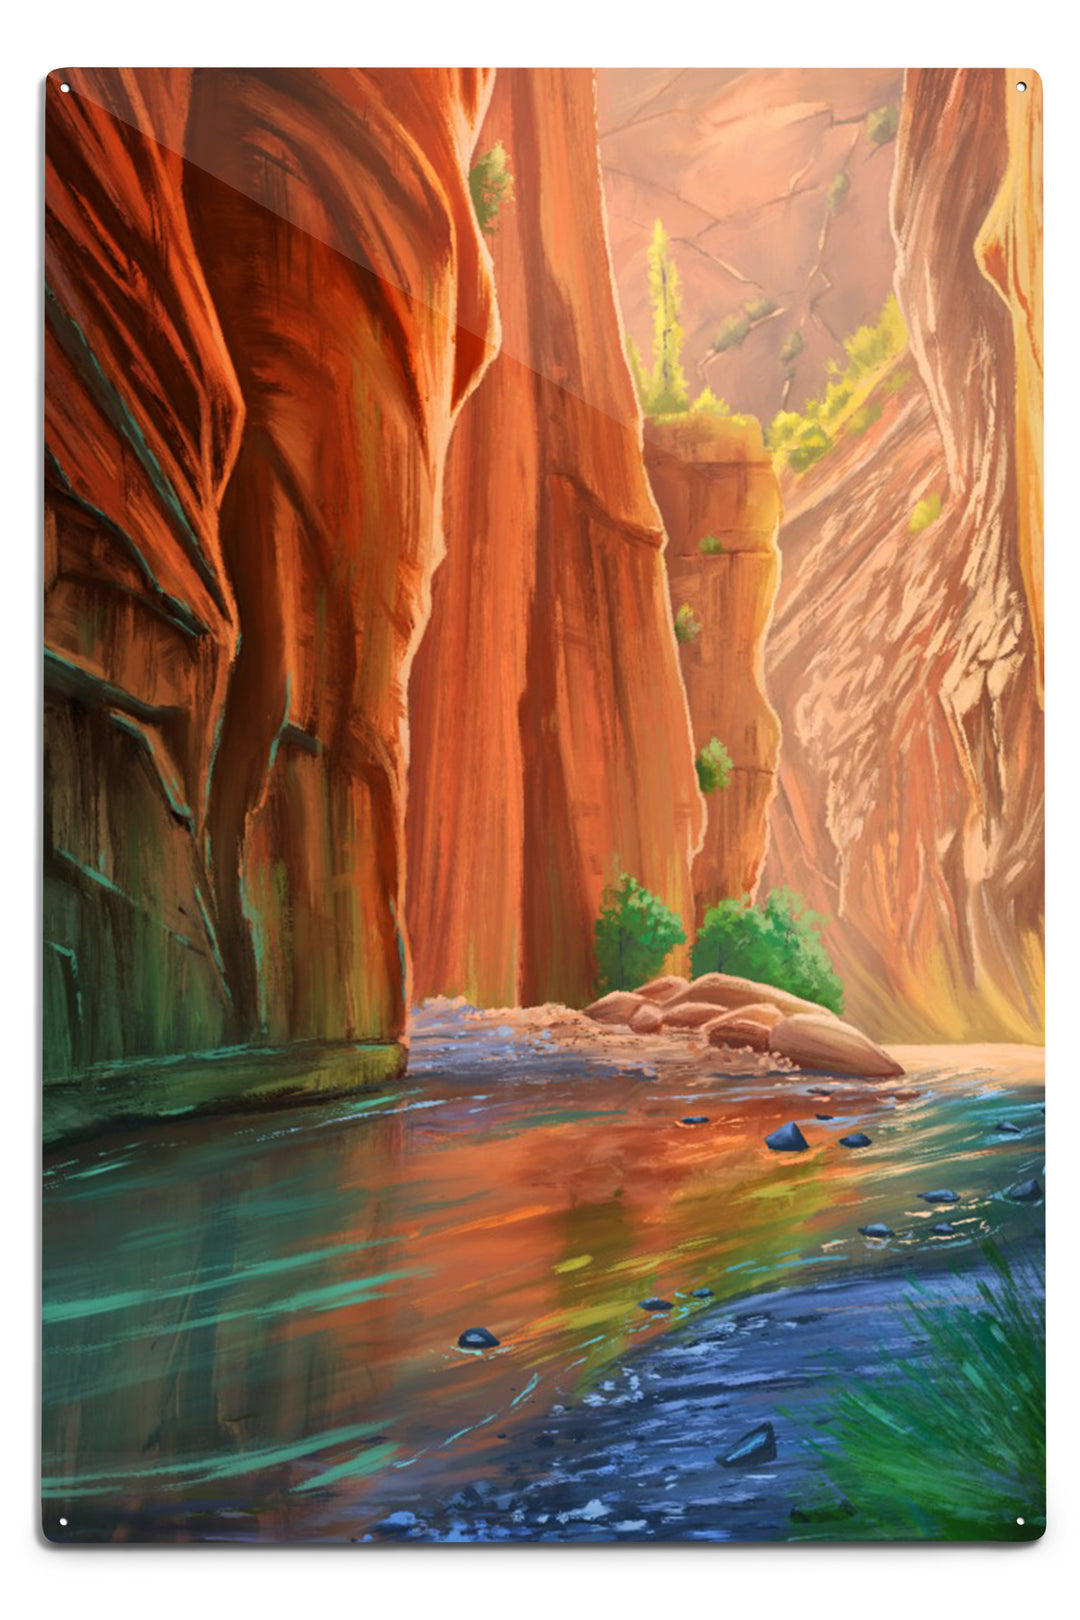 Zion National Park, Utah, The Narrows, Oil Painting, Metal Signs